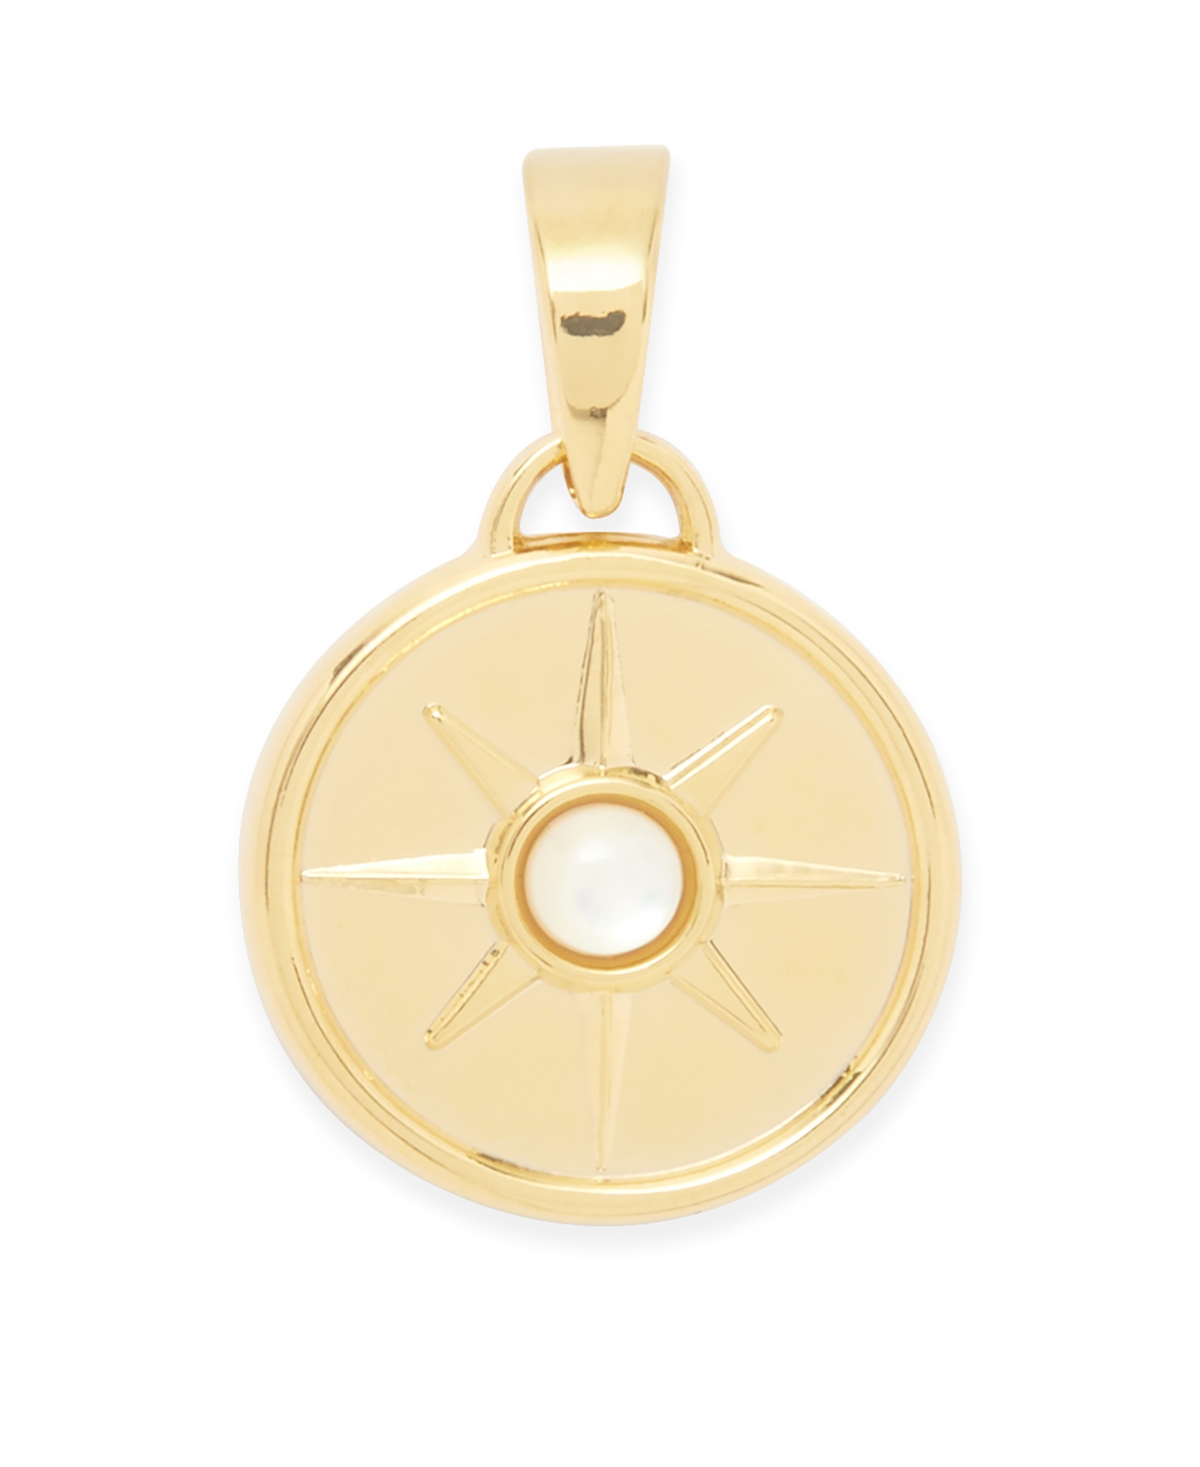 Brook & York 14k Gold-plated Rosa Cultured Mother Of Pearl Charm